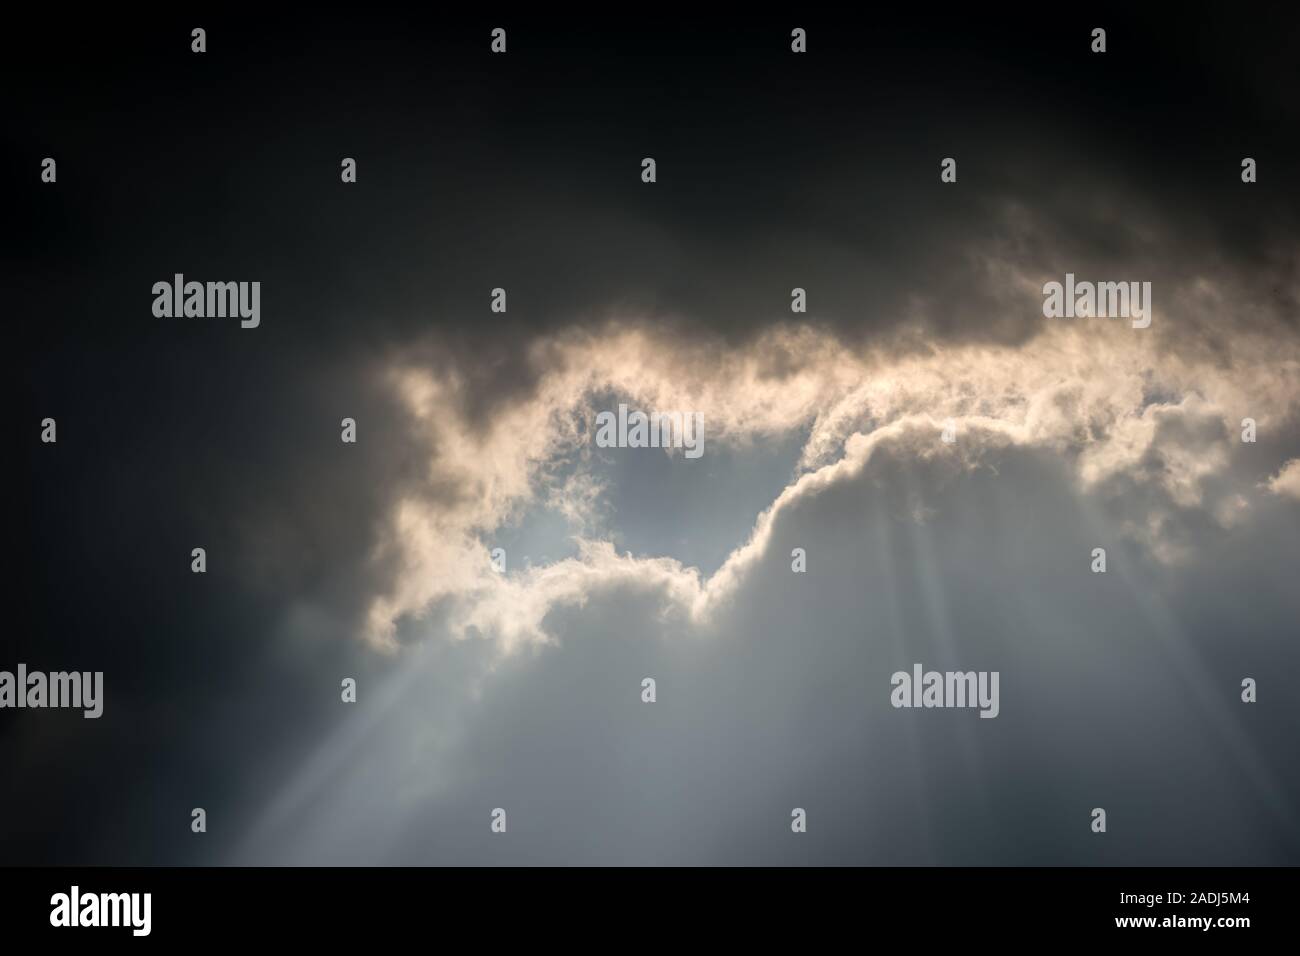 An unusual cloud formation with dark storm clouds meeting light, a bright silver lining as the sun shines through a gap Stock Photo